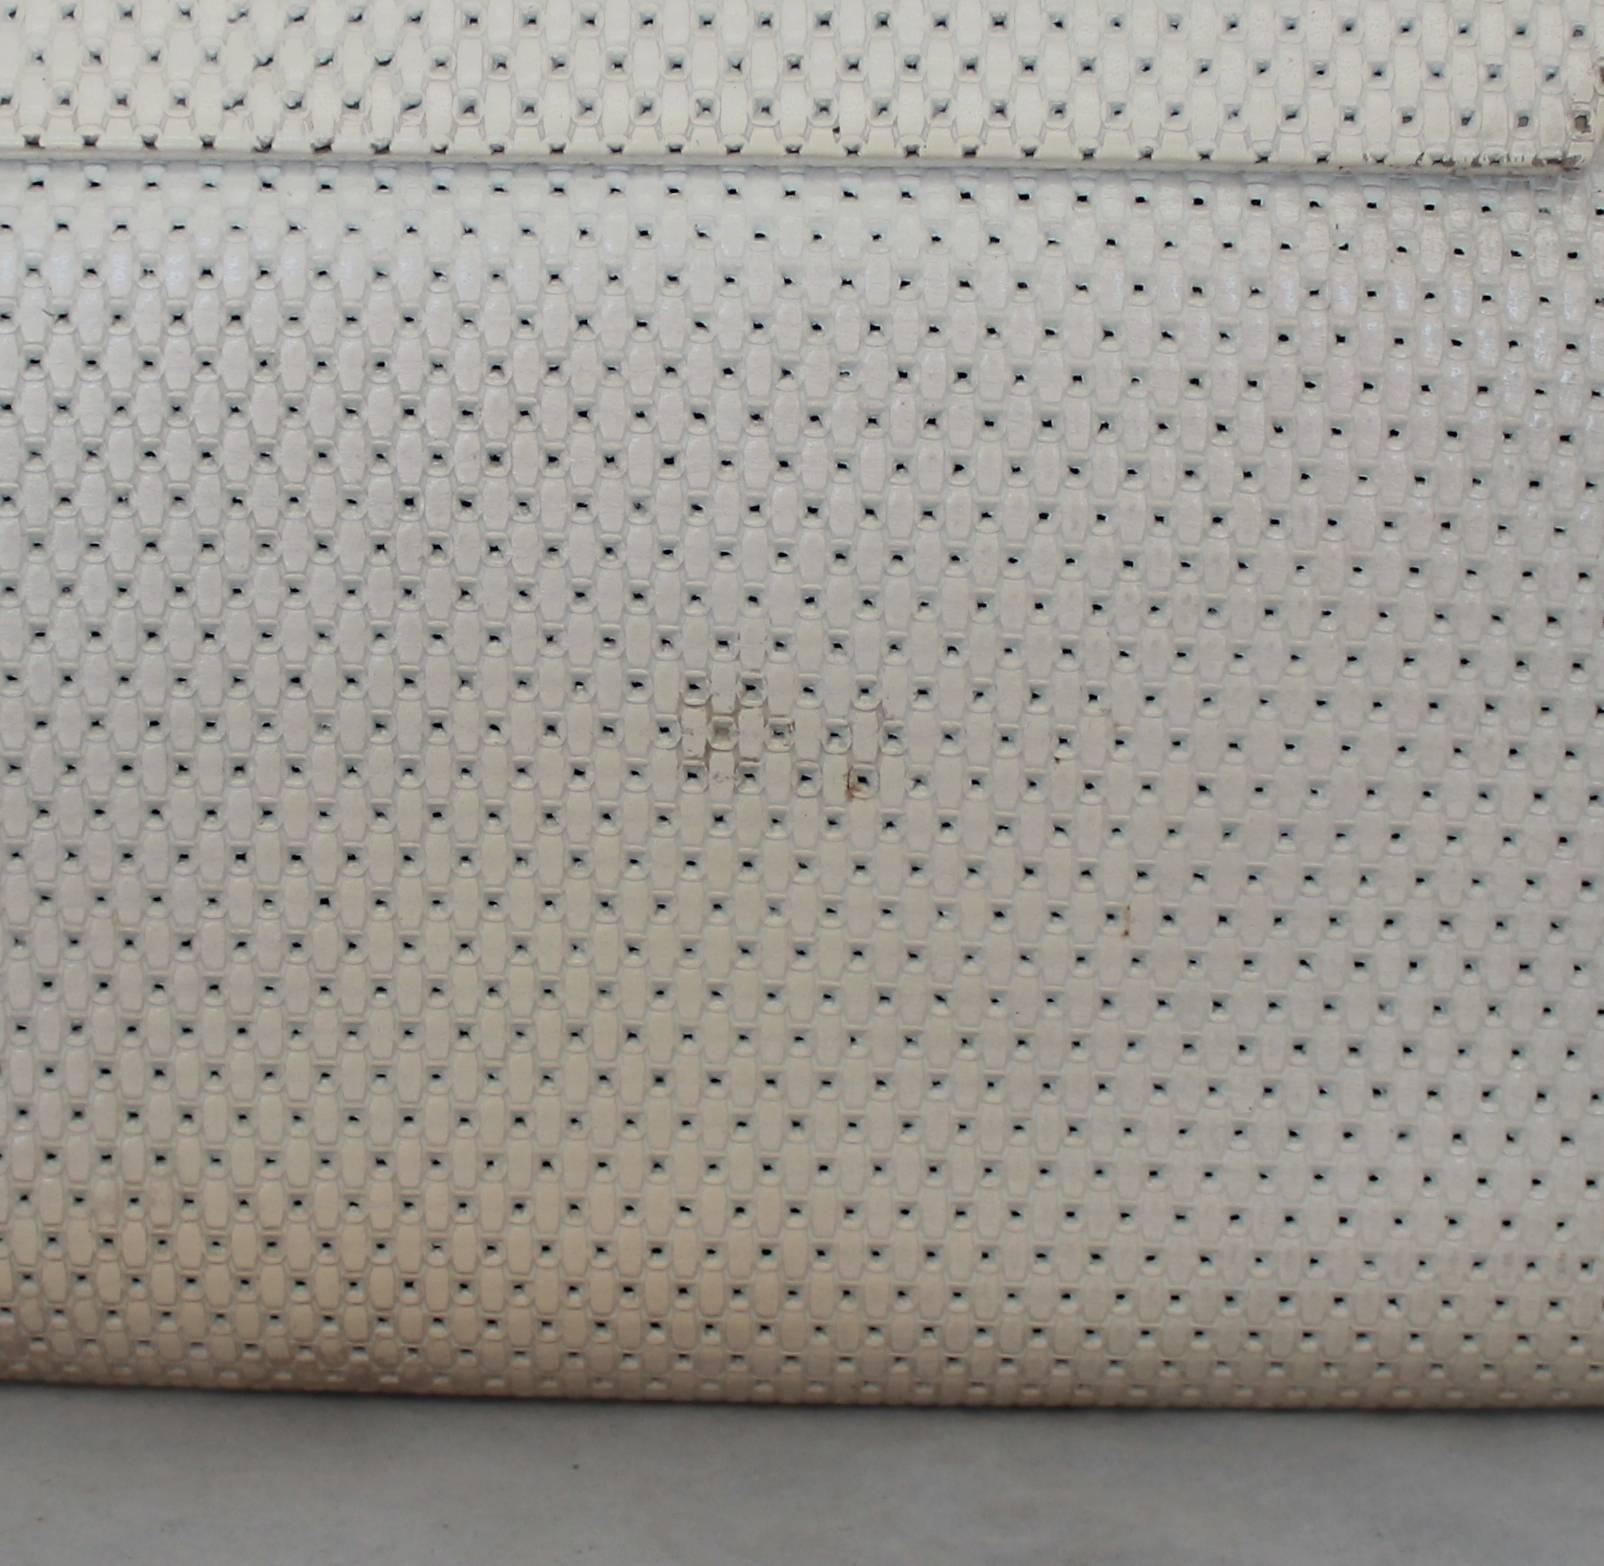 White Paris Jacomo Ivory Perforated Leather Clutch with Green Stone - circa 1980's 